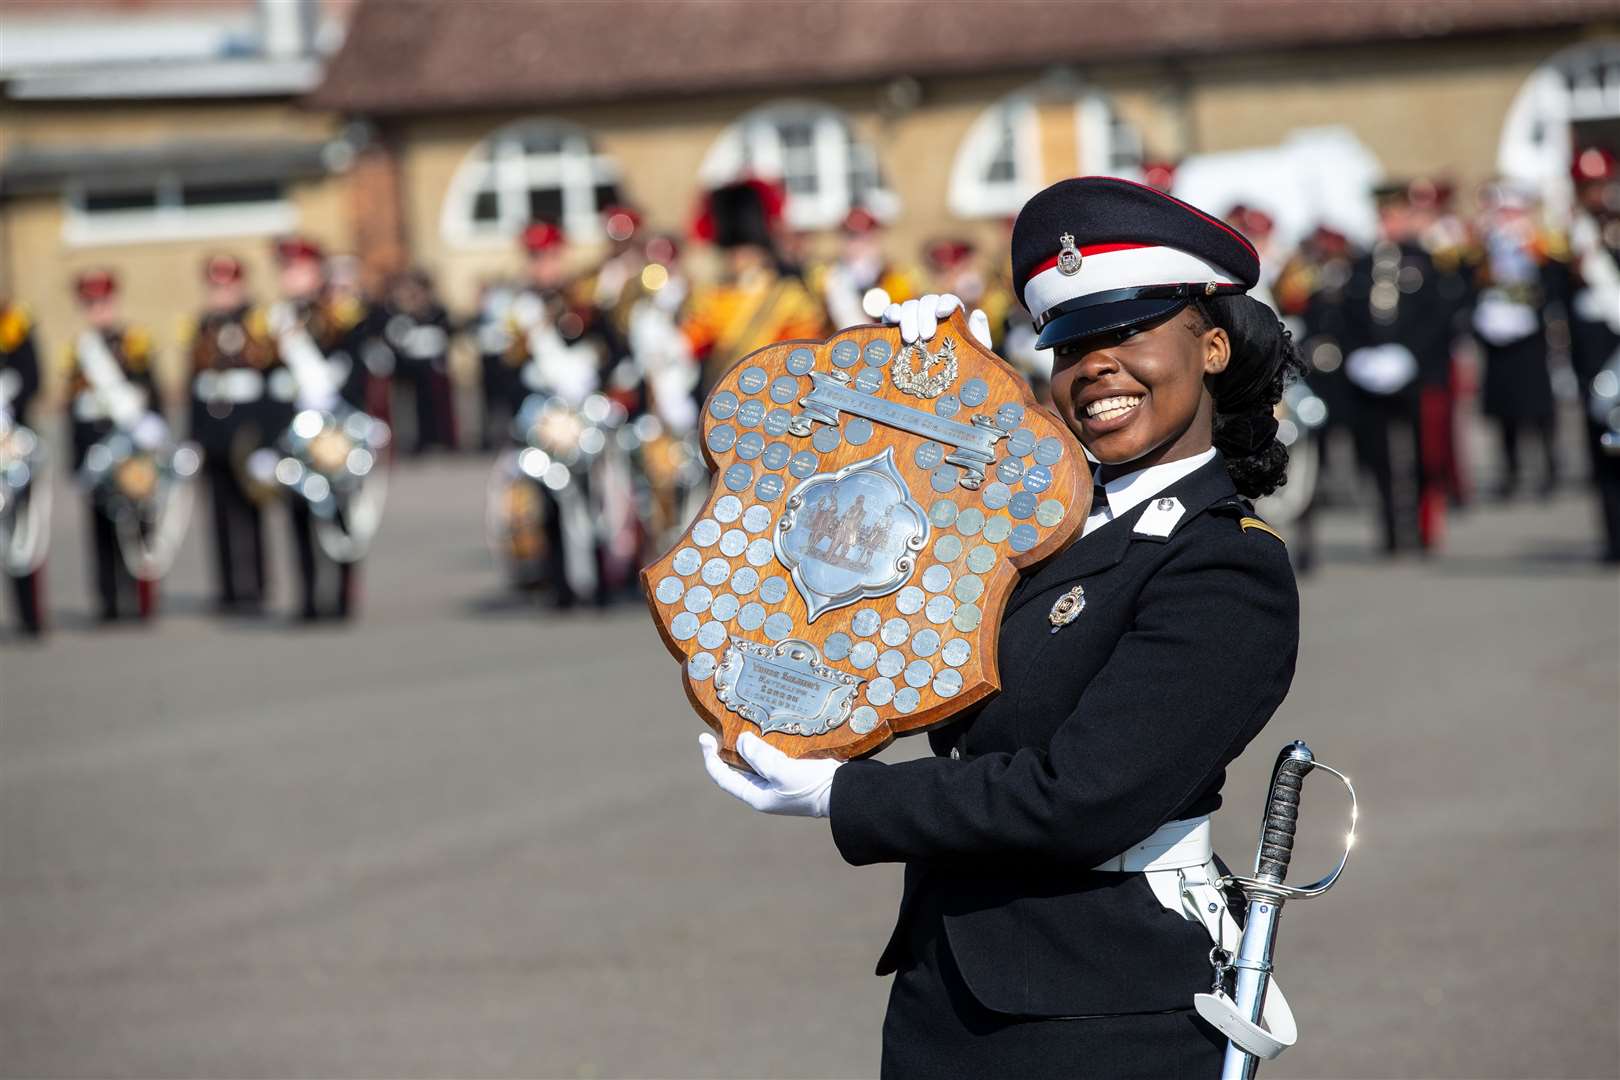 Jere Olawoyin, Junior Under Officer of Alanbrooke House, with the Drill Competition Shield. Photo by Matt Bristow/mattbristow.net